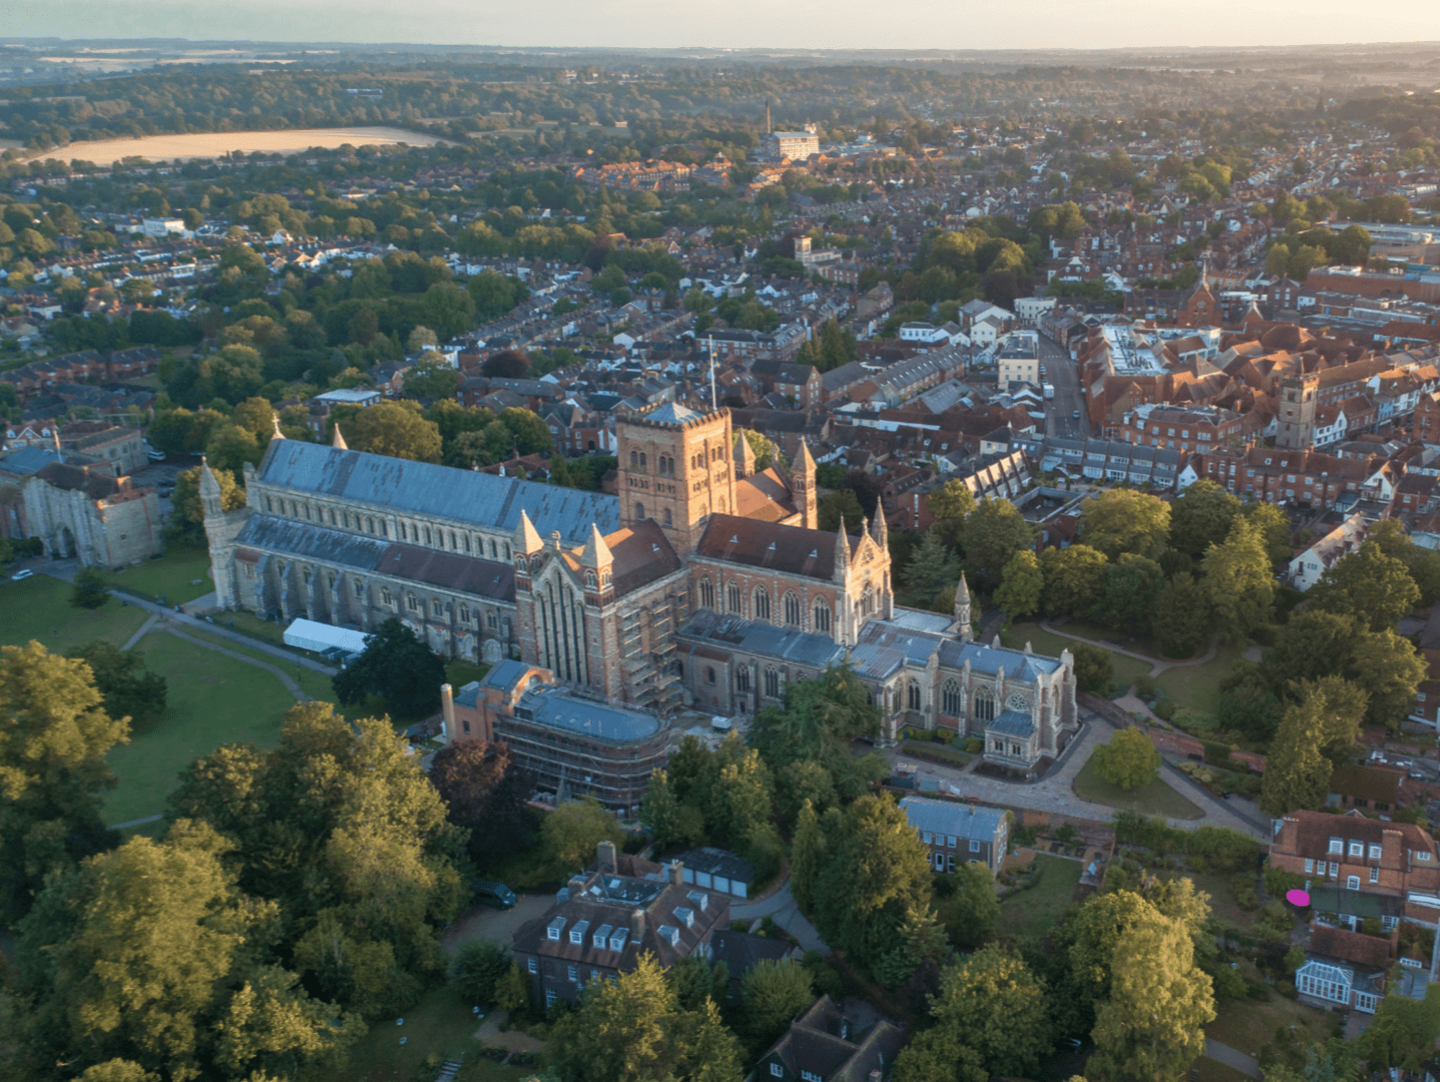 St Albans Cathedral from above, with the town centre in the background